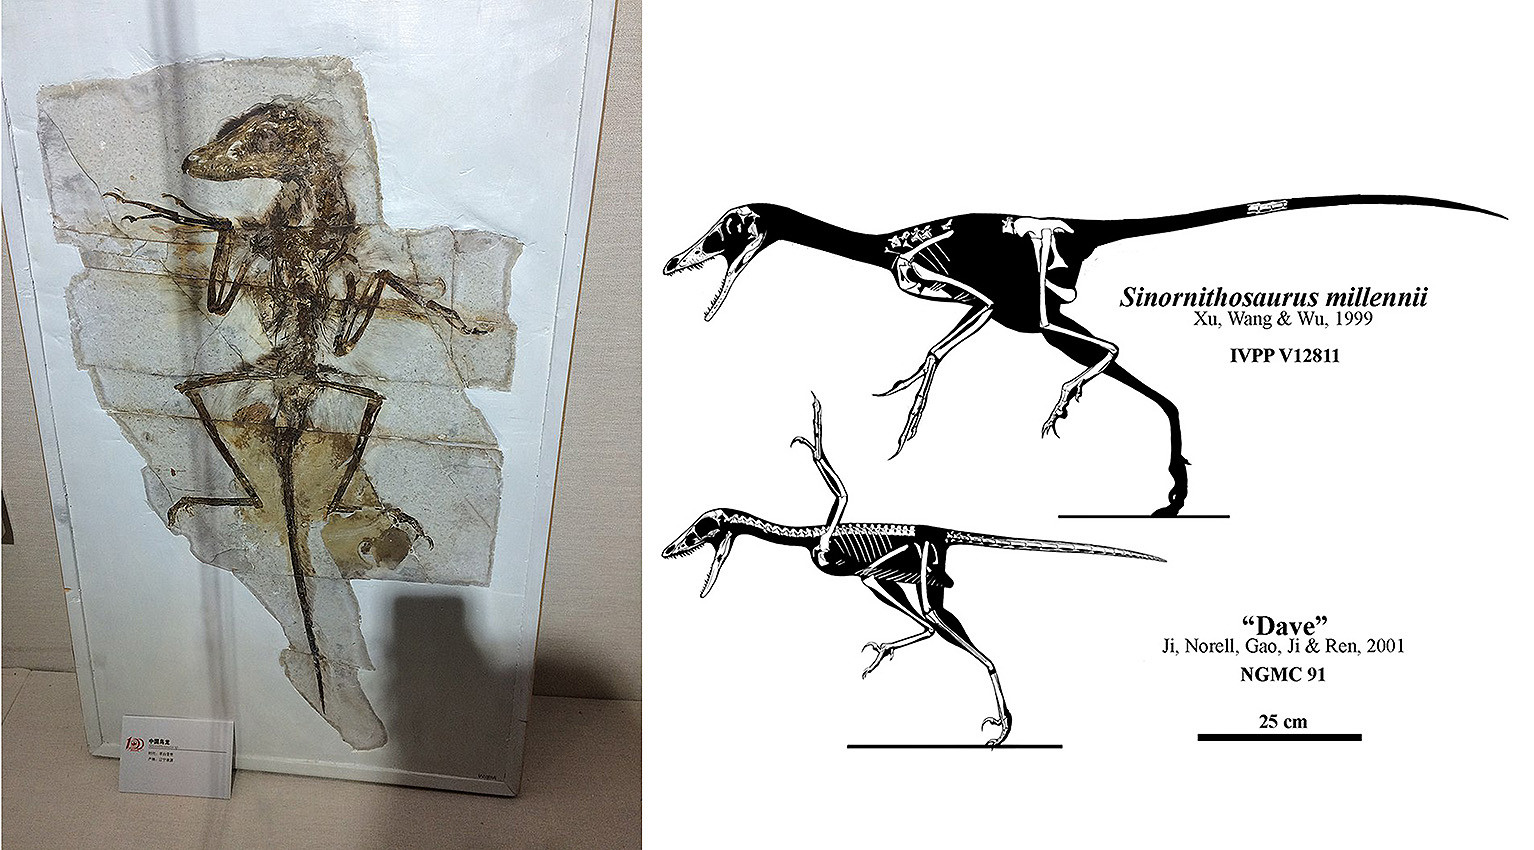 Reference images (NOT MINE): Well preserved fossil with feathers plus skeletal reconstructions